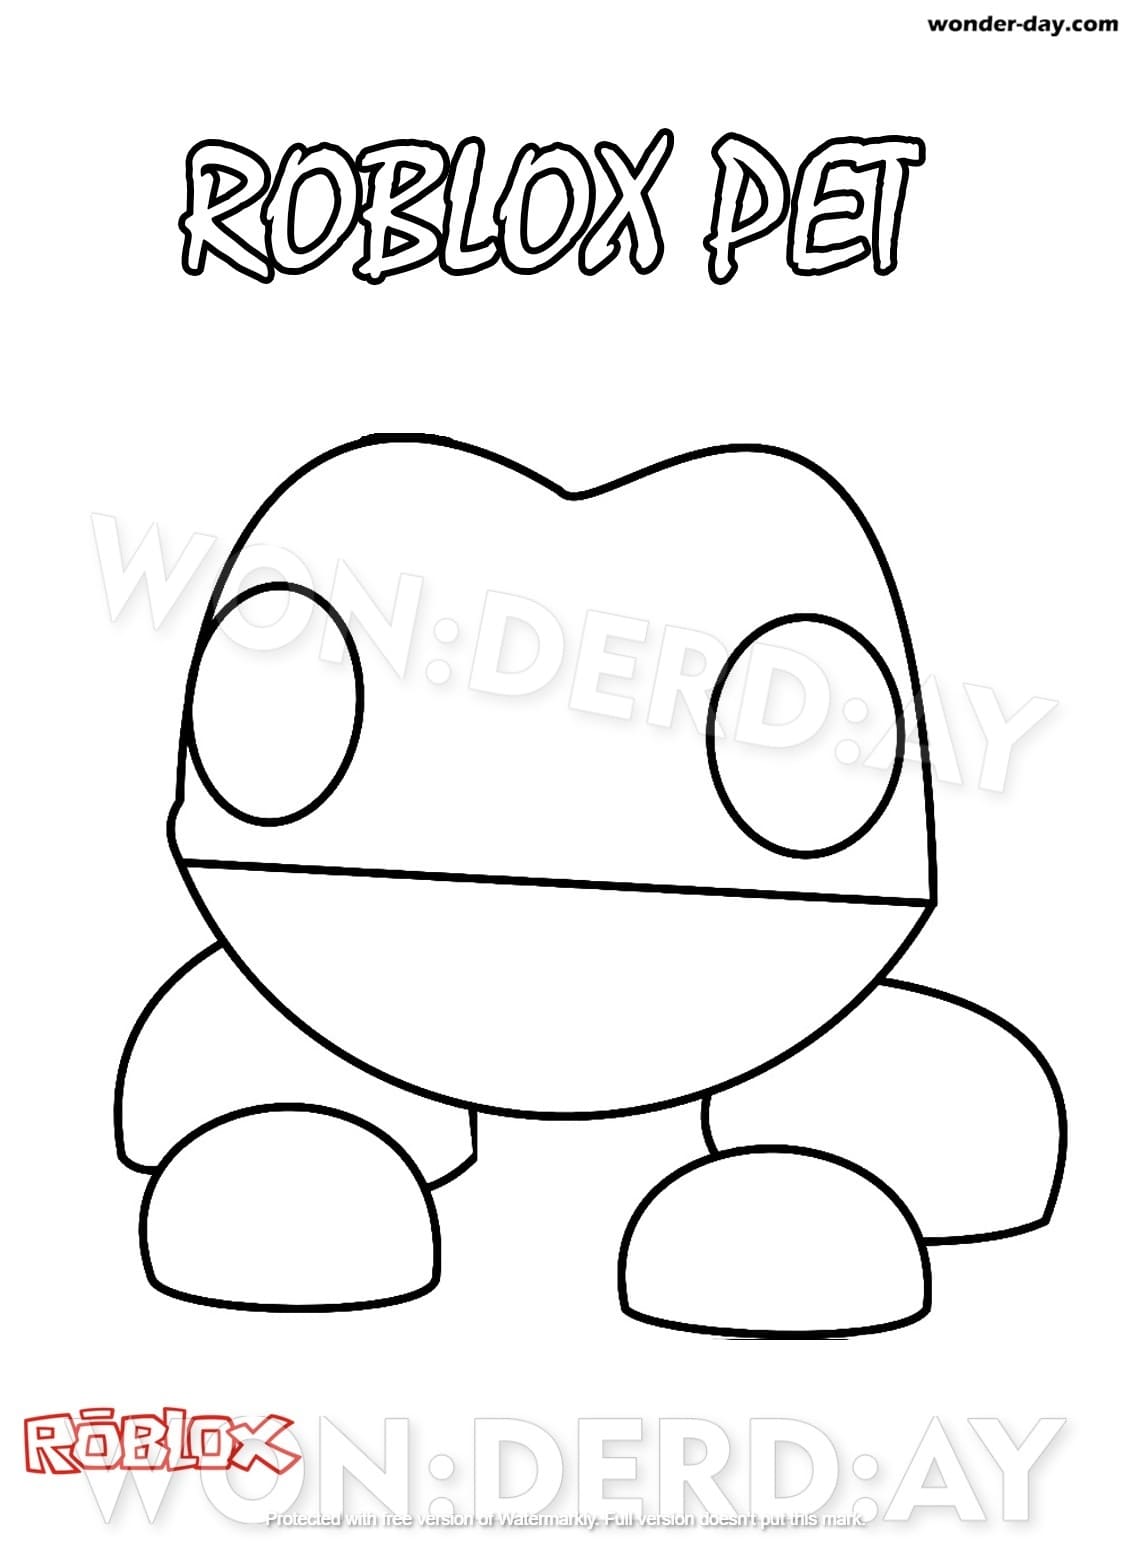 Coloring Pages Adopt Me Print For Free Wonder Day Com